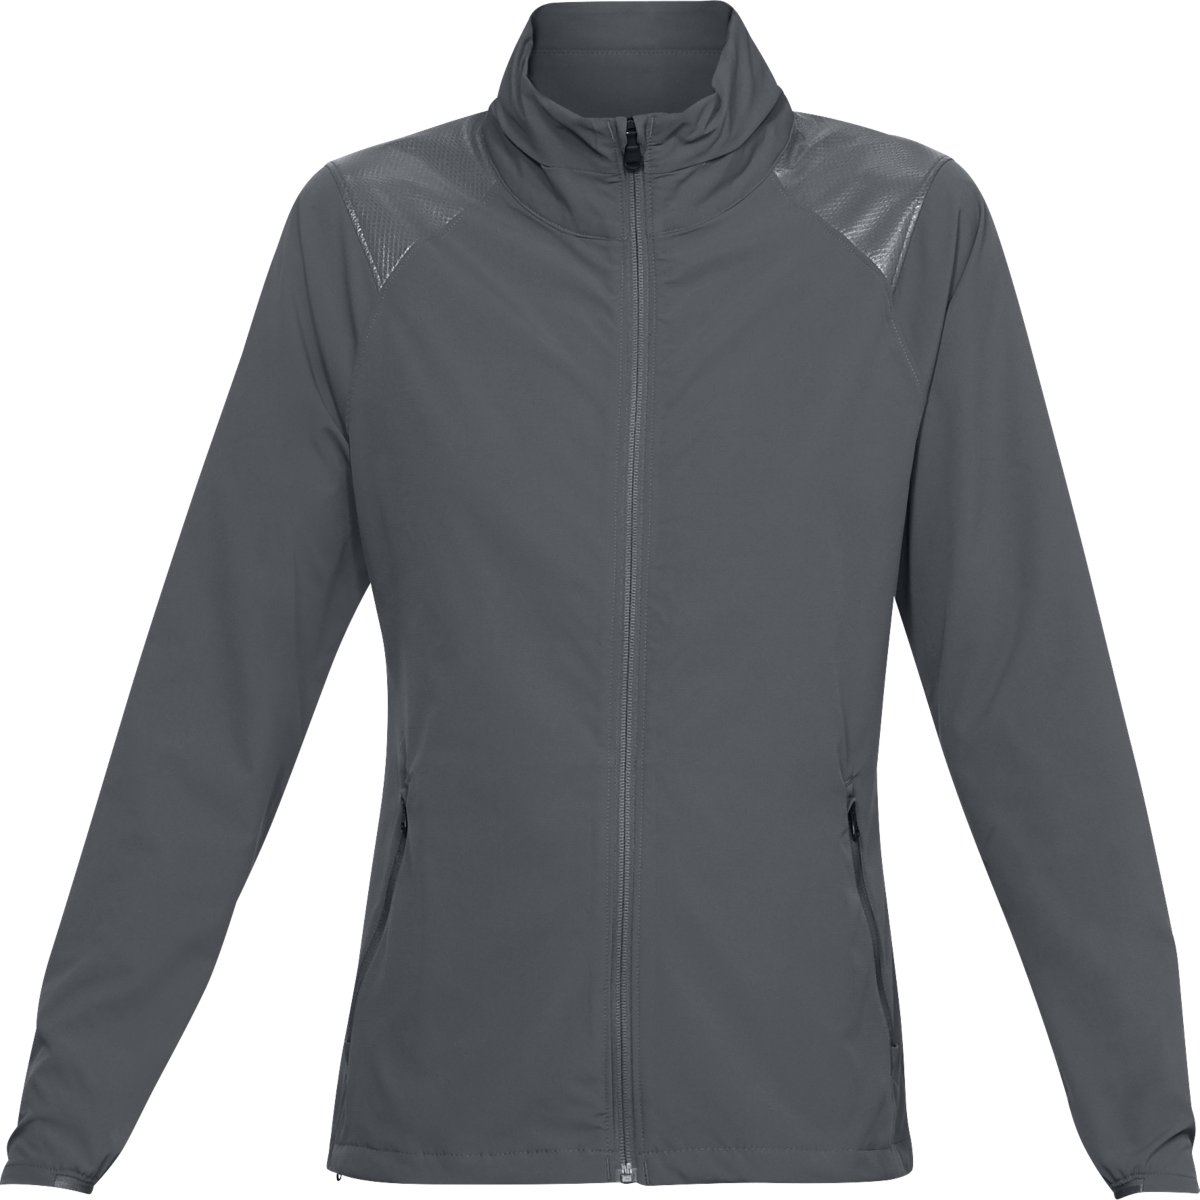 Under Armour Storm Windstrike Full Zip Pitch Gray – L